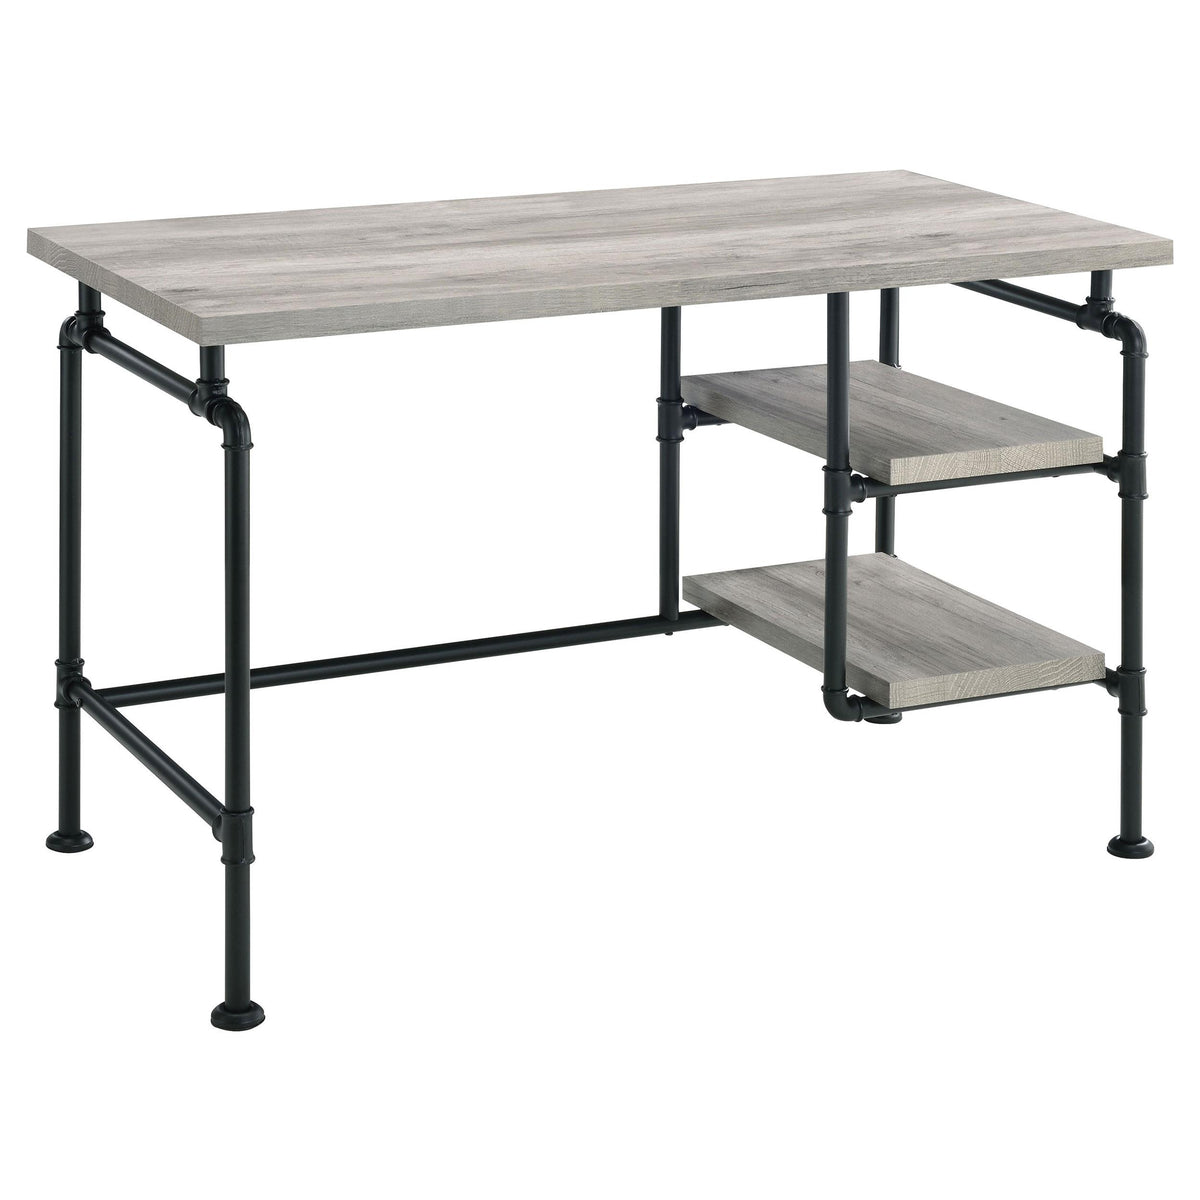 Delray 2-tier Open Shelving Writing Desk Grey Driftwood and Black  Half Price Furniture